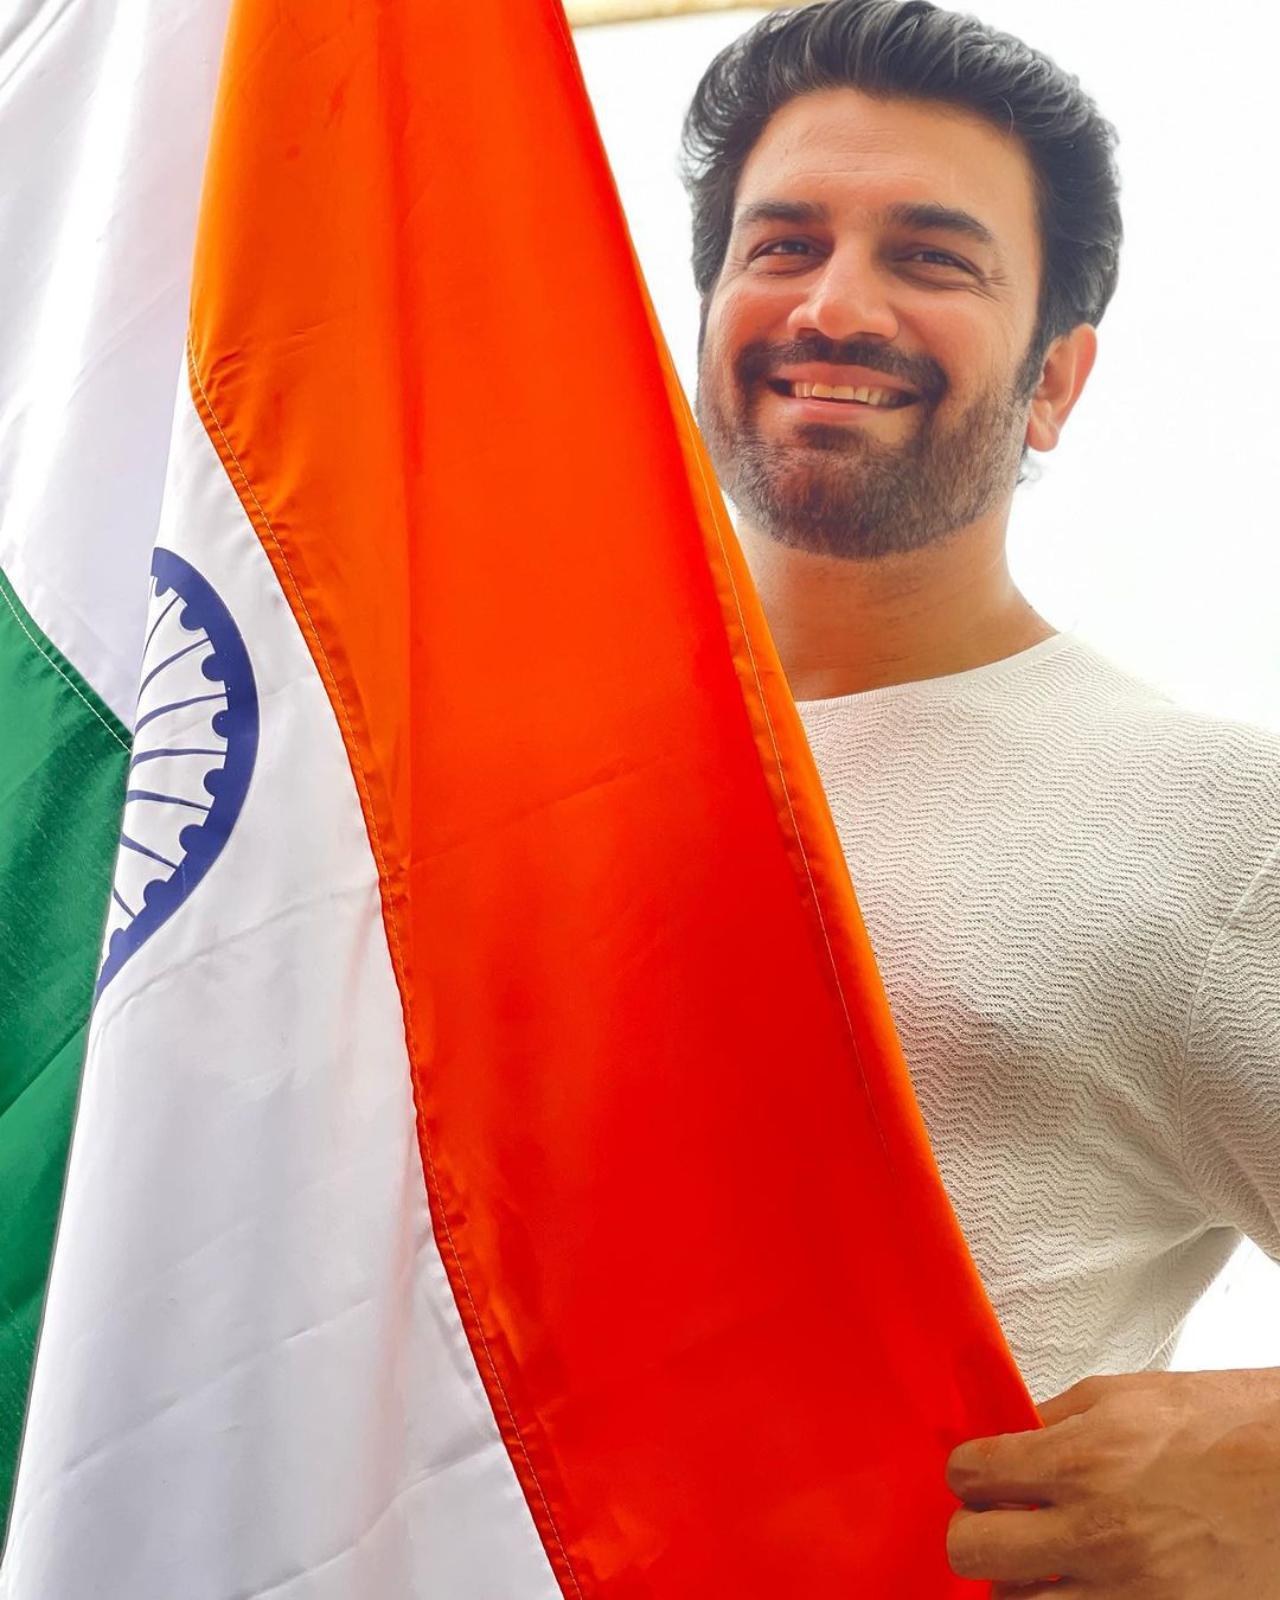 Sharad Kelkar also posted a picture of himself posing with the Indian tricolour while wishing fellow citizens